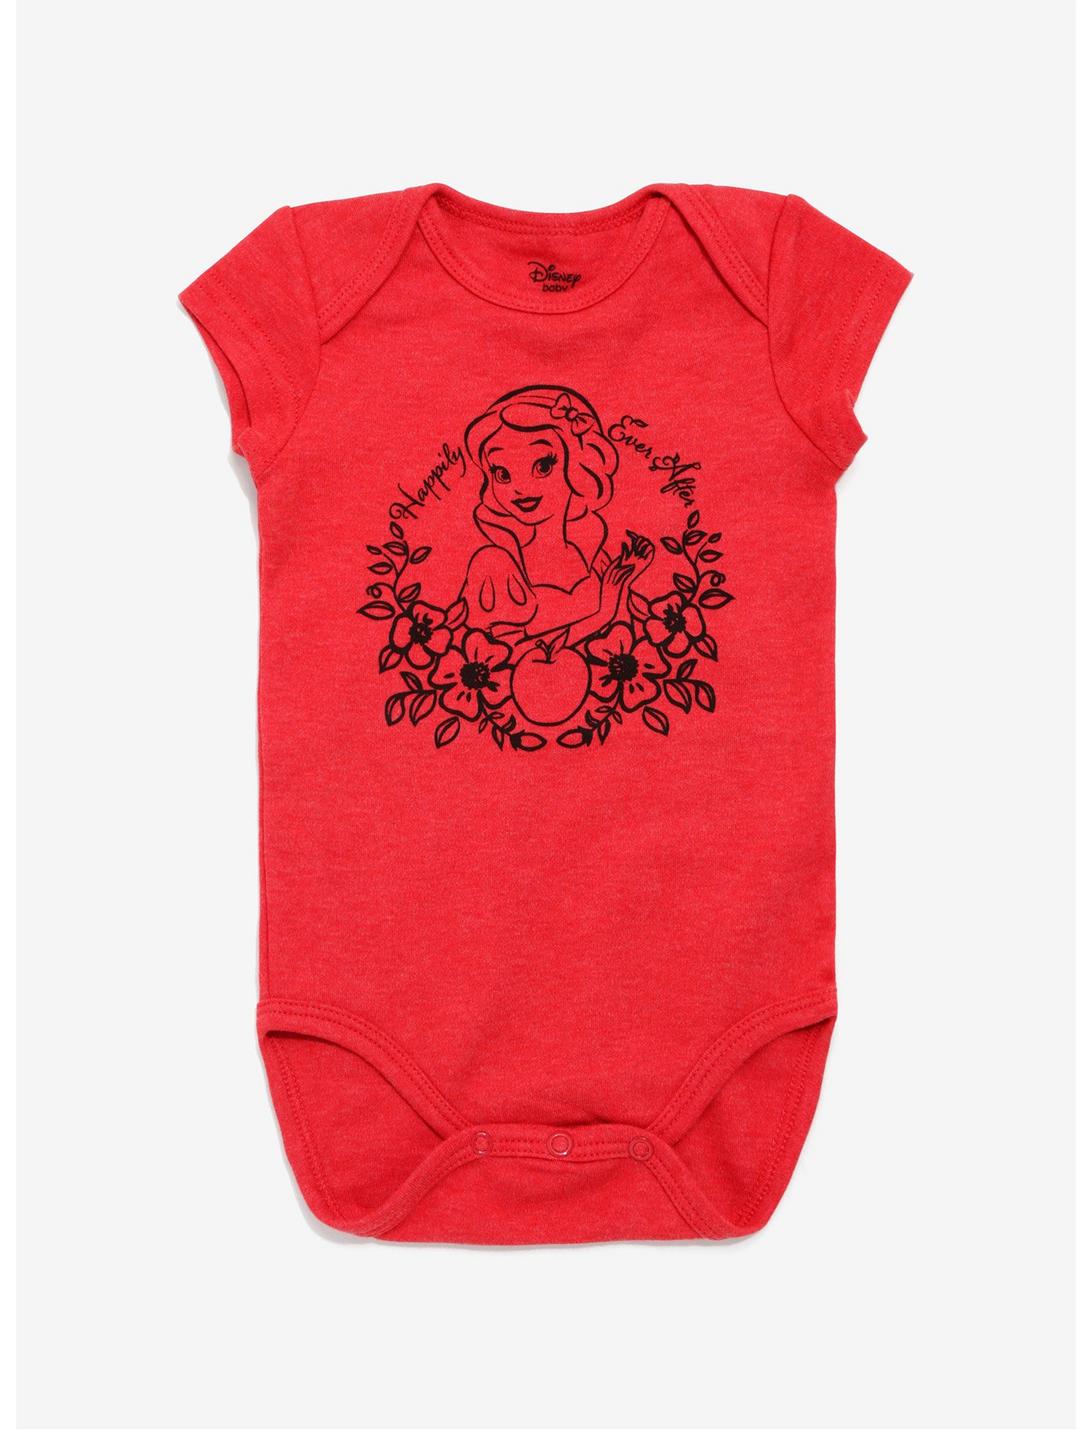 Disney Snow White And The Seven Dwarfs Baby Bodysuit, RED, hi-res